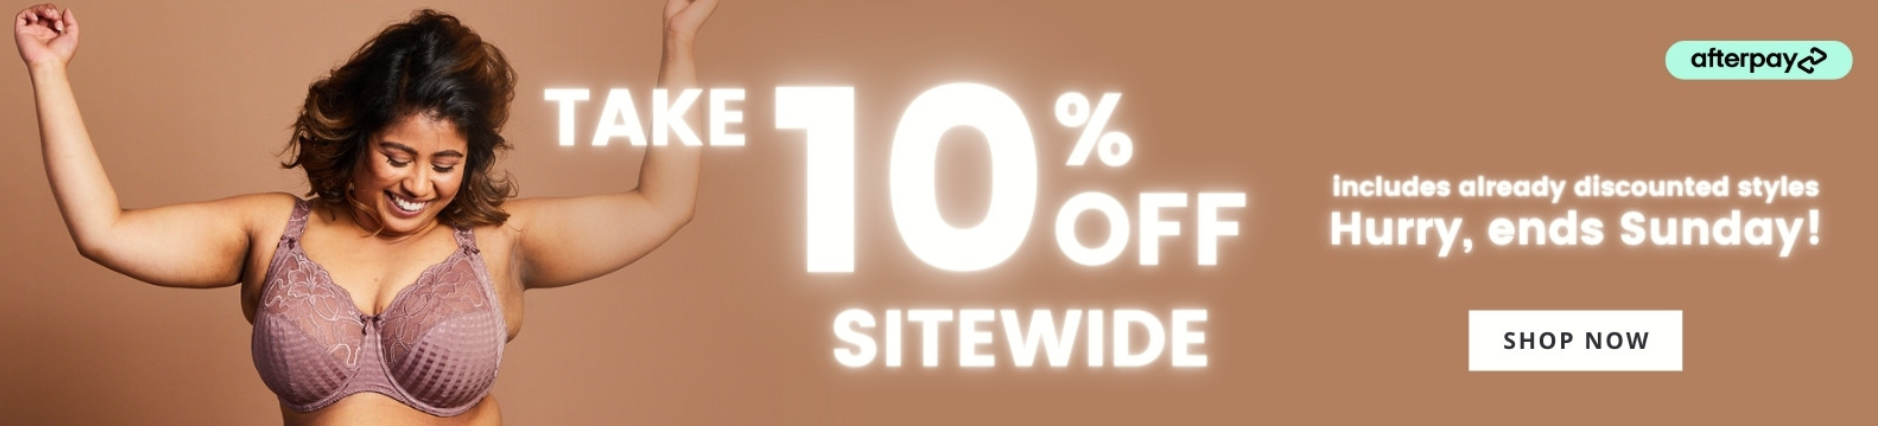 Afterpay Day sale - 10% OFF sitewide